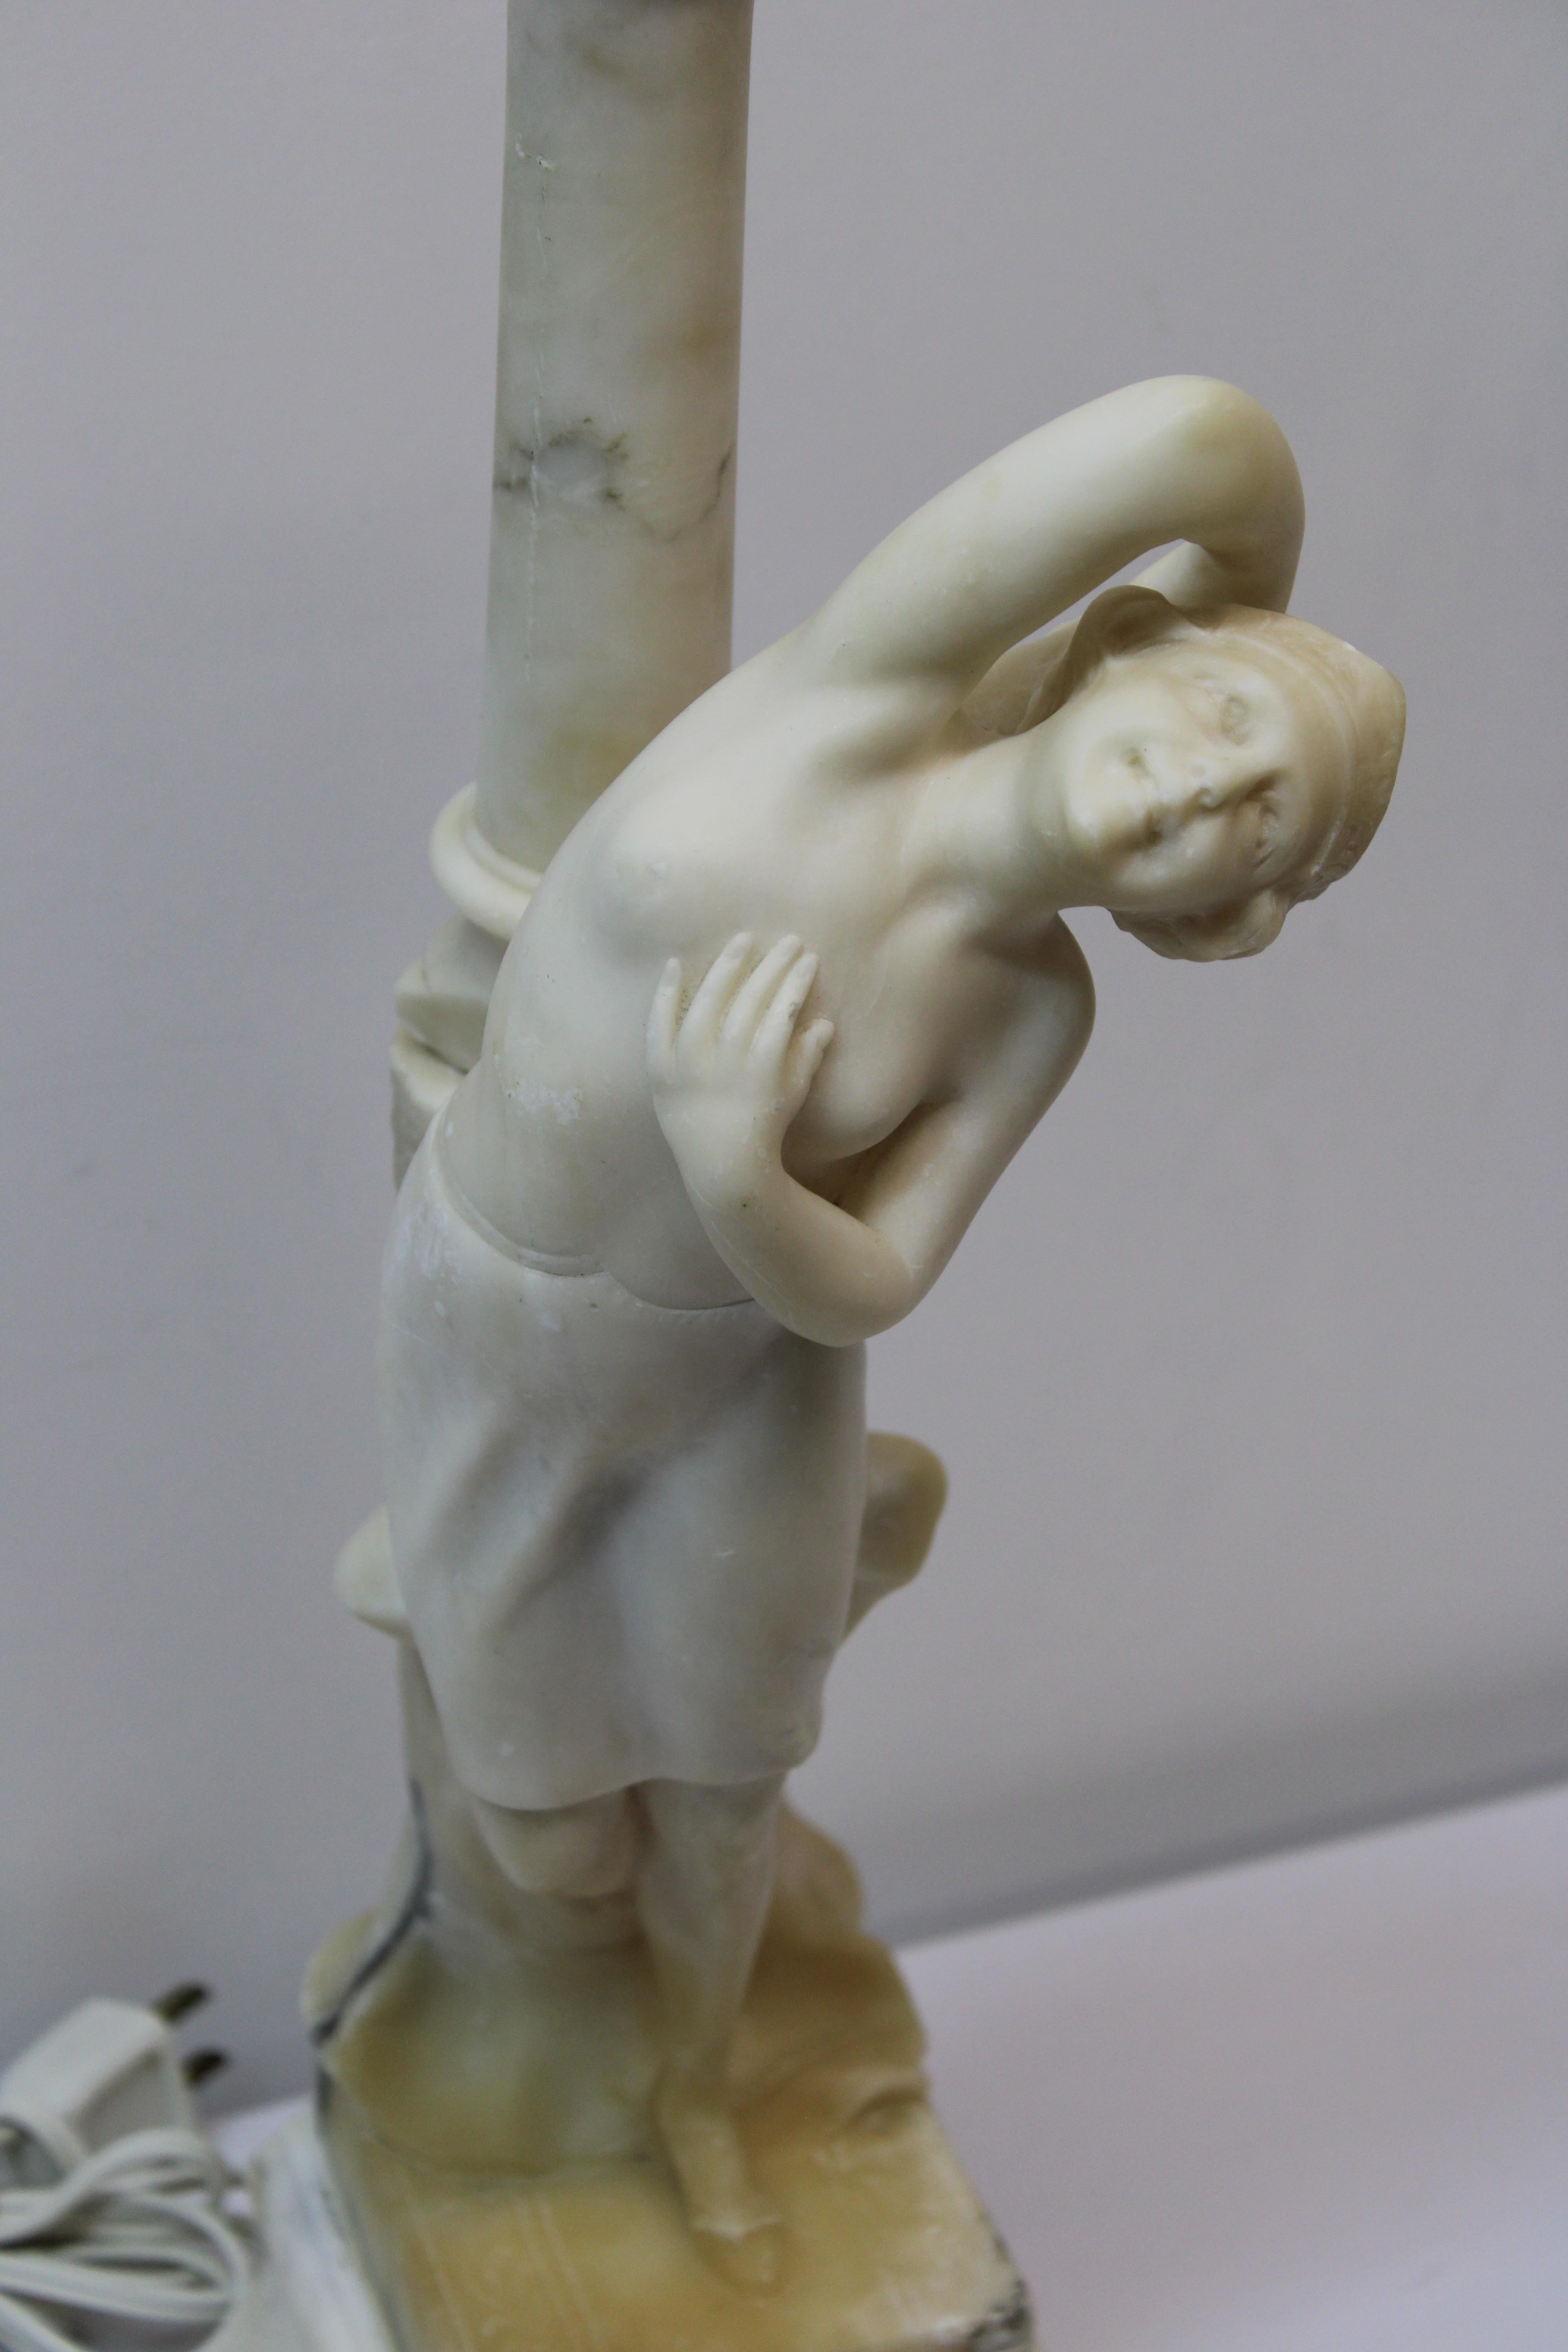 C. early 20th century

Alabaster figural table lamp with Dancer.